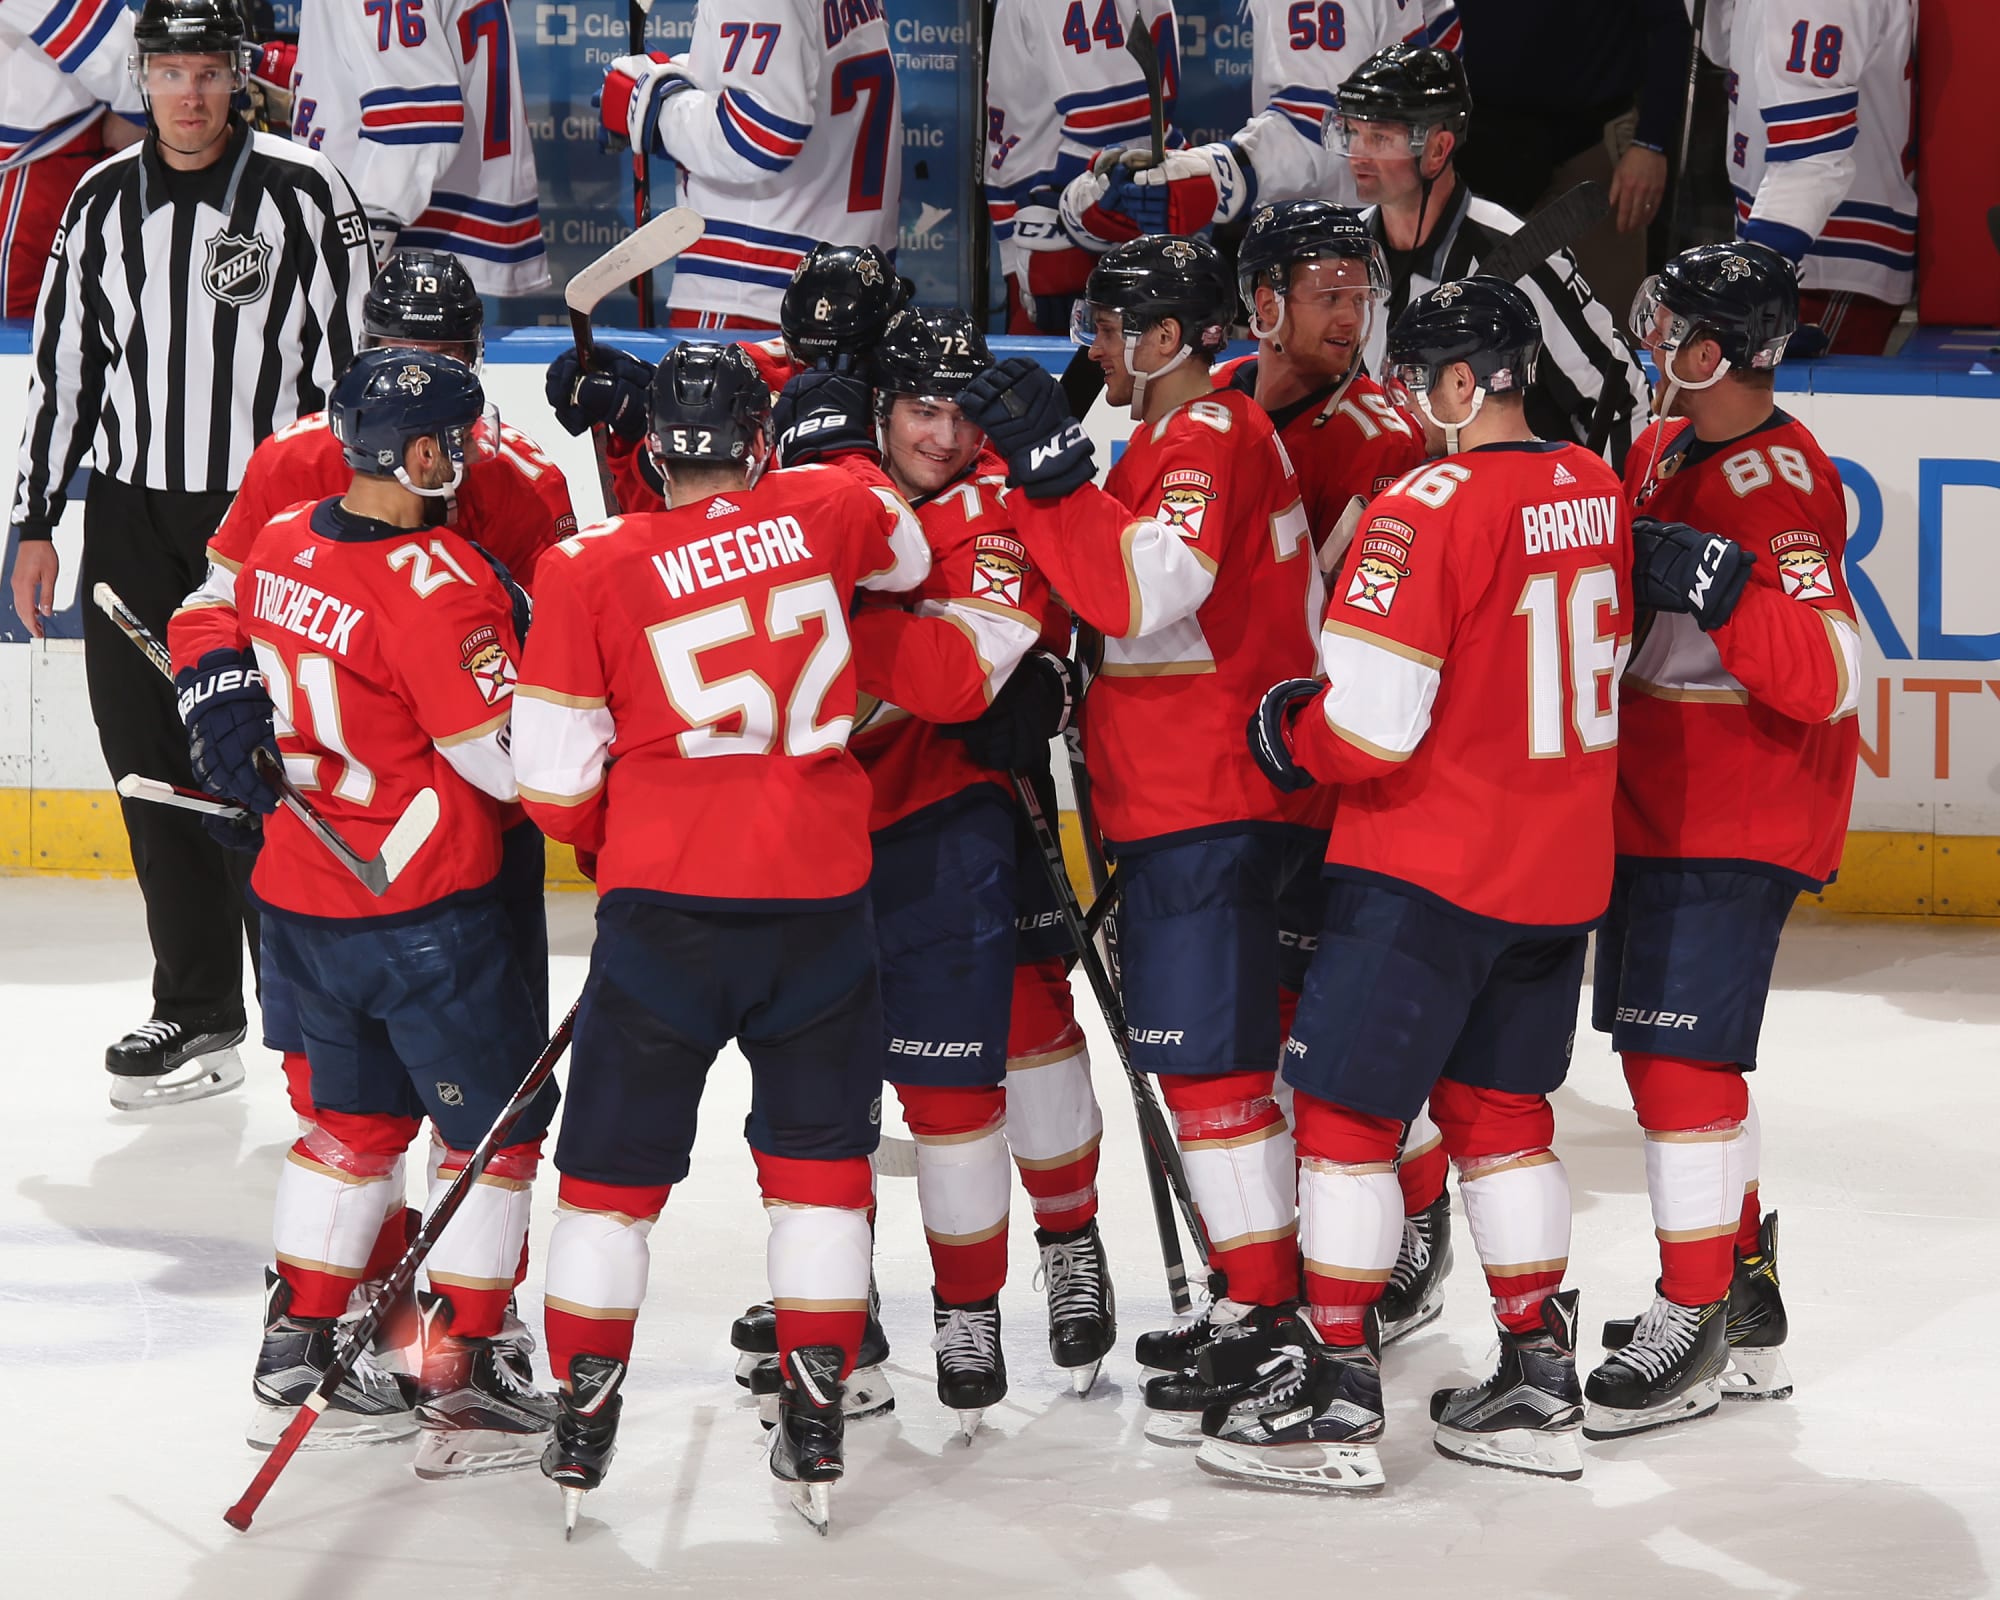 Florida Panthers win their second straight, defeating the Rangers 43